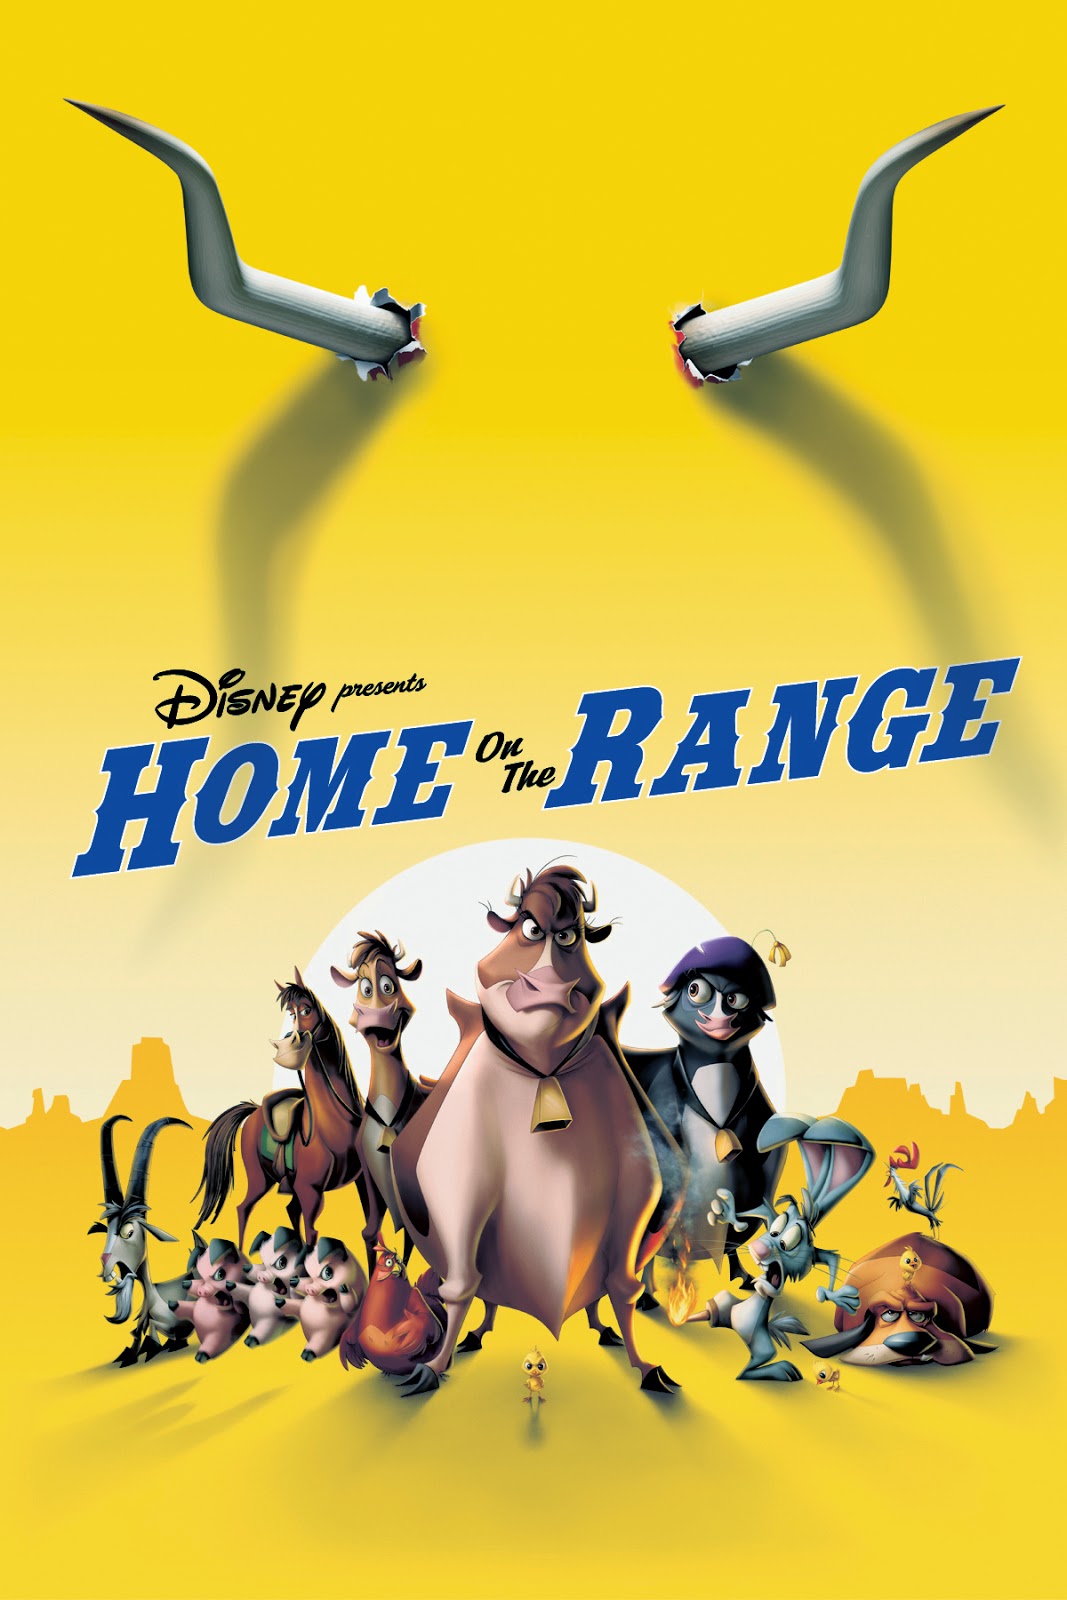 Watch Home On The Range 2004 Online For Free Full Movie English Stream Watch Disney Movies Online Free